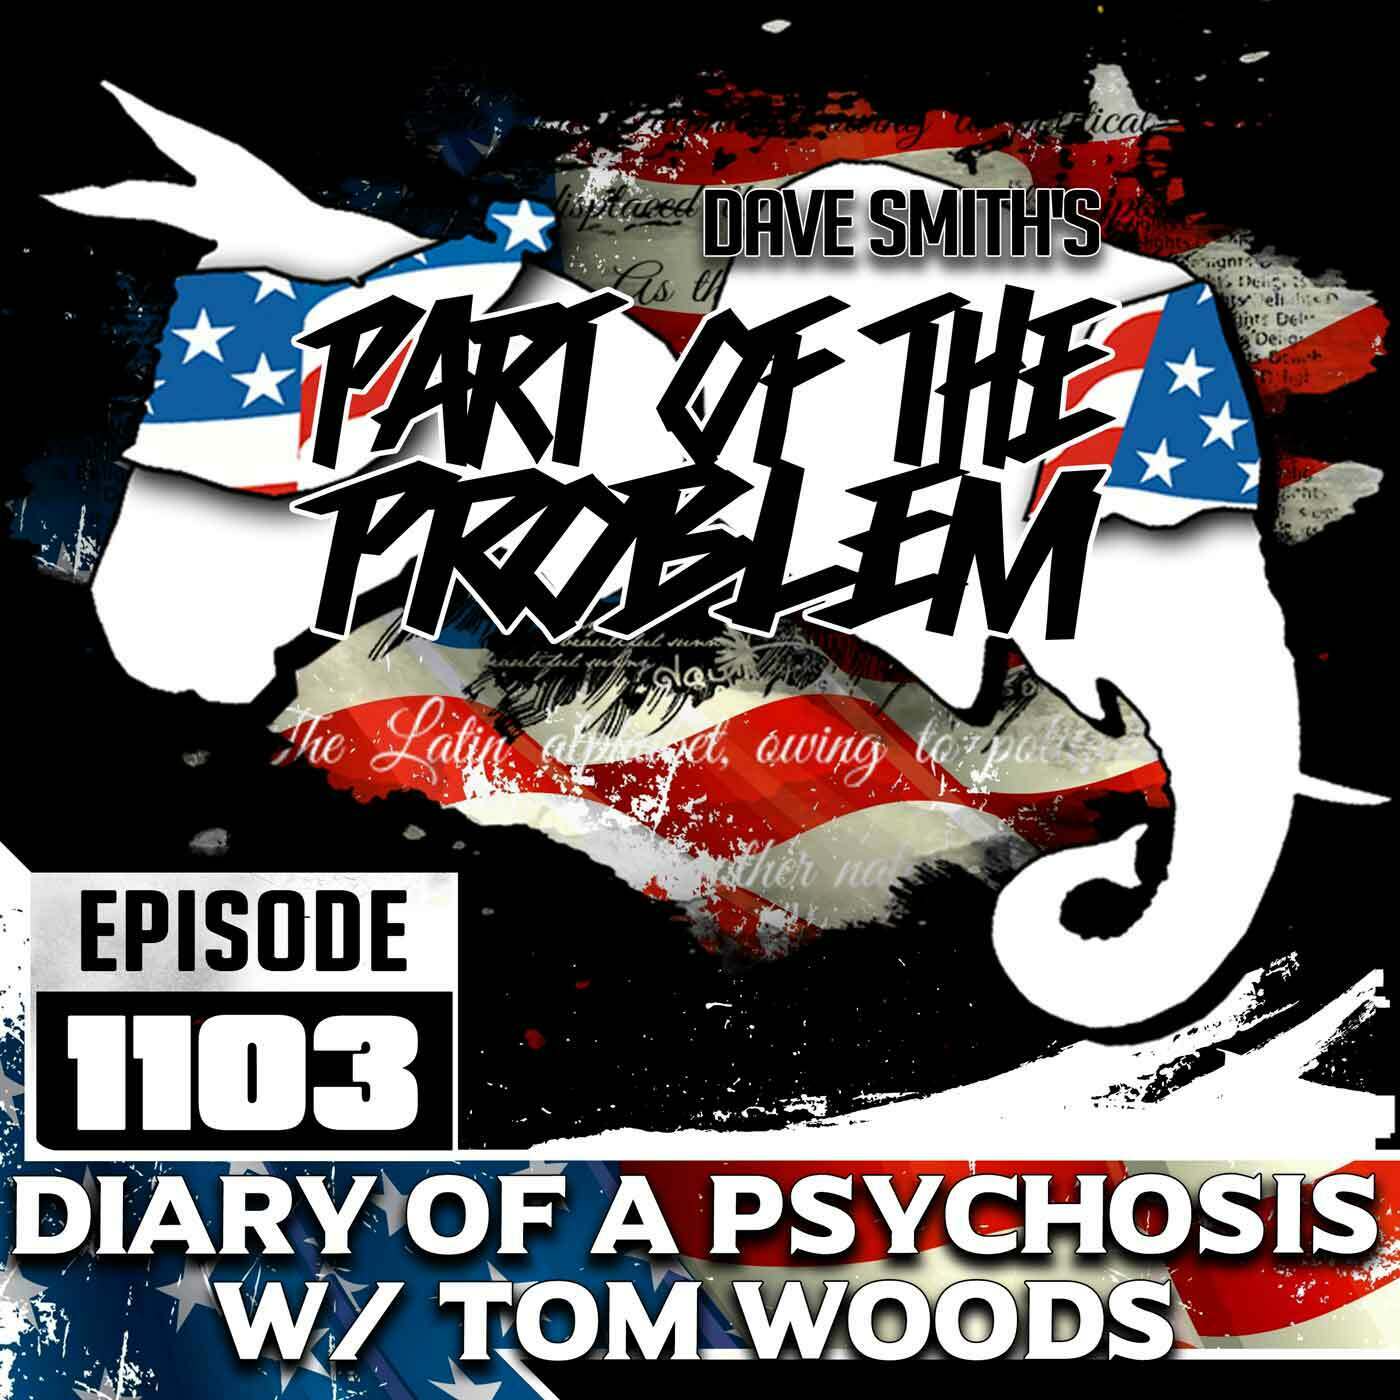 Diary of a Psychosis w/ Tom Woods